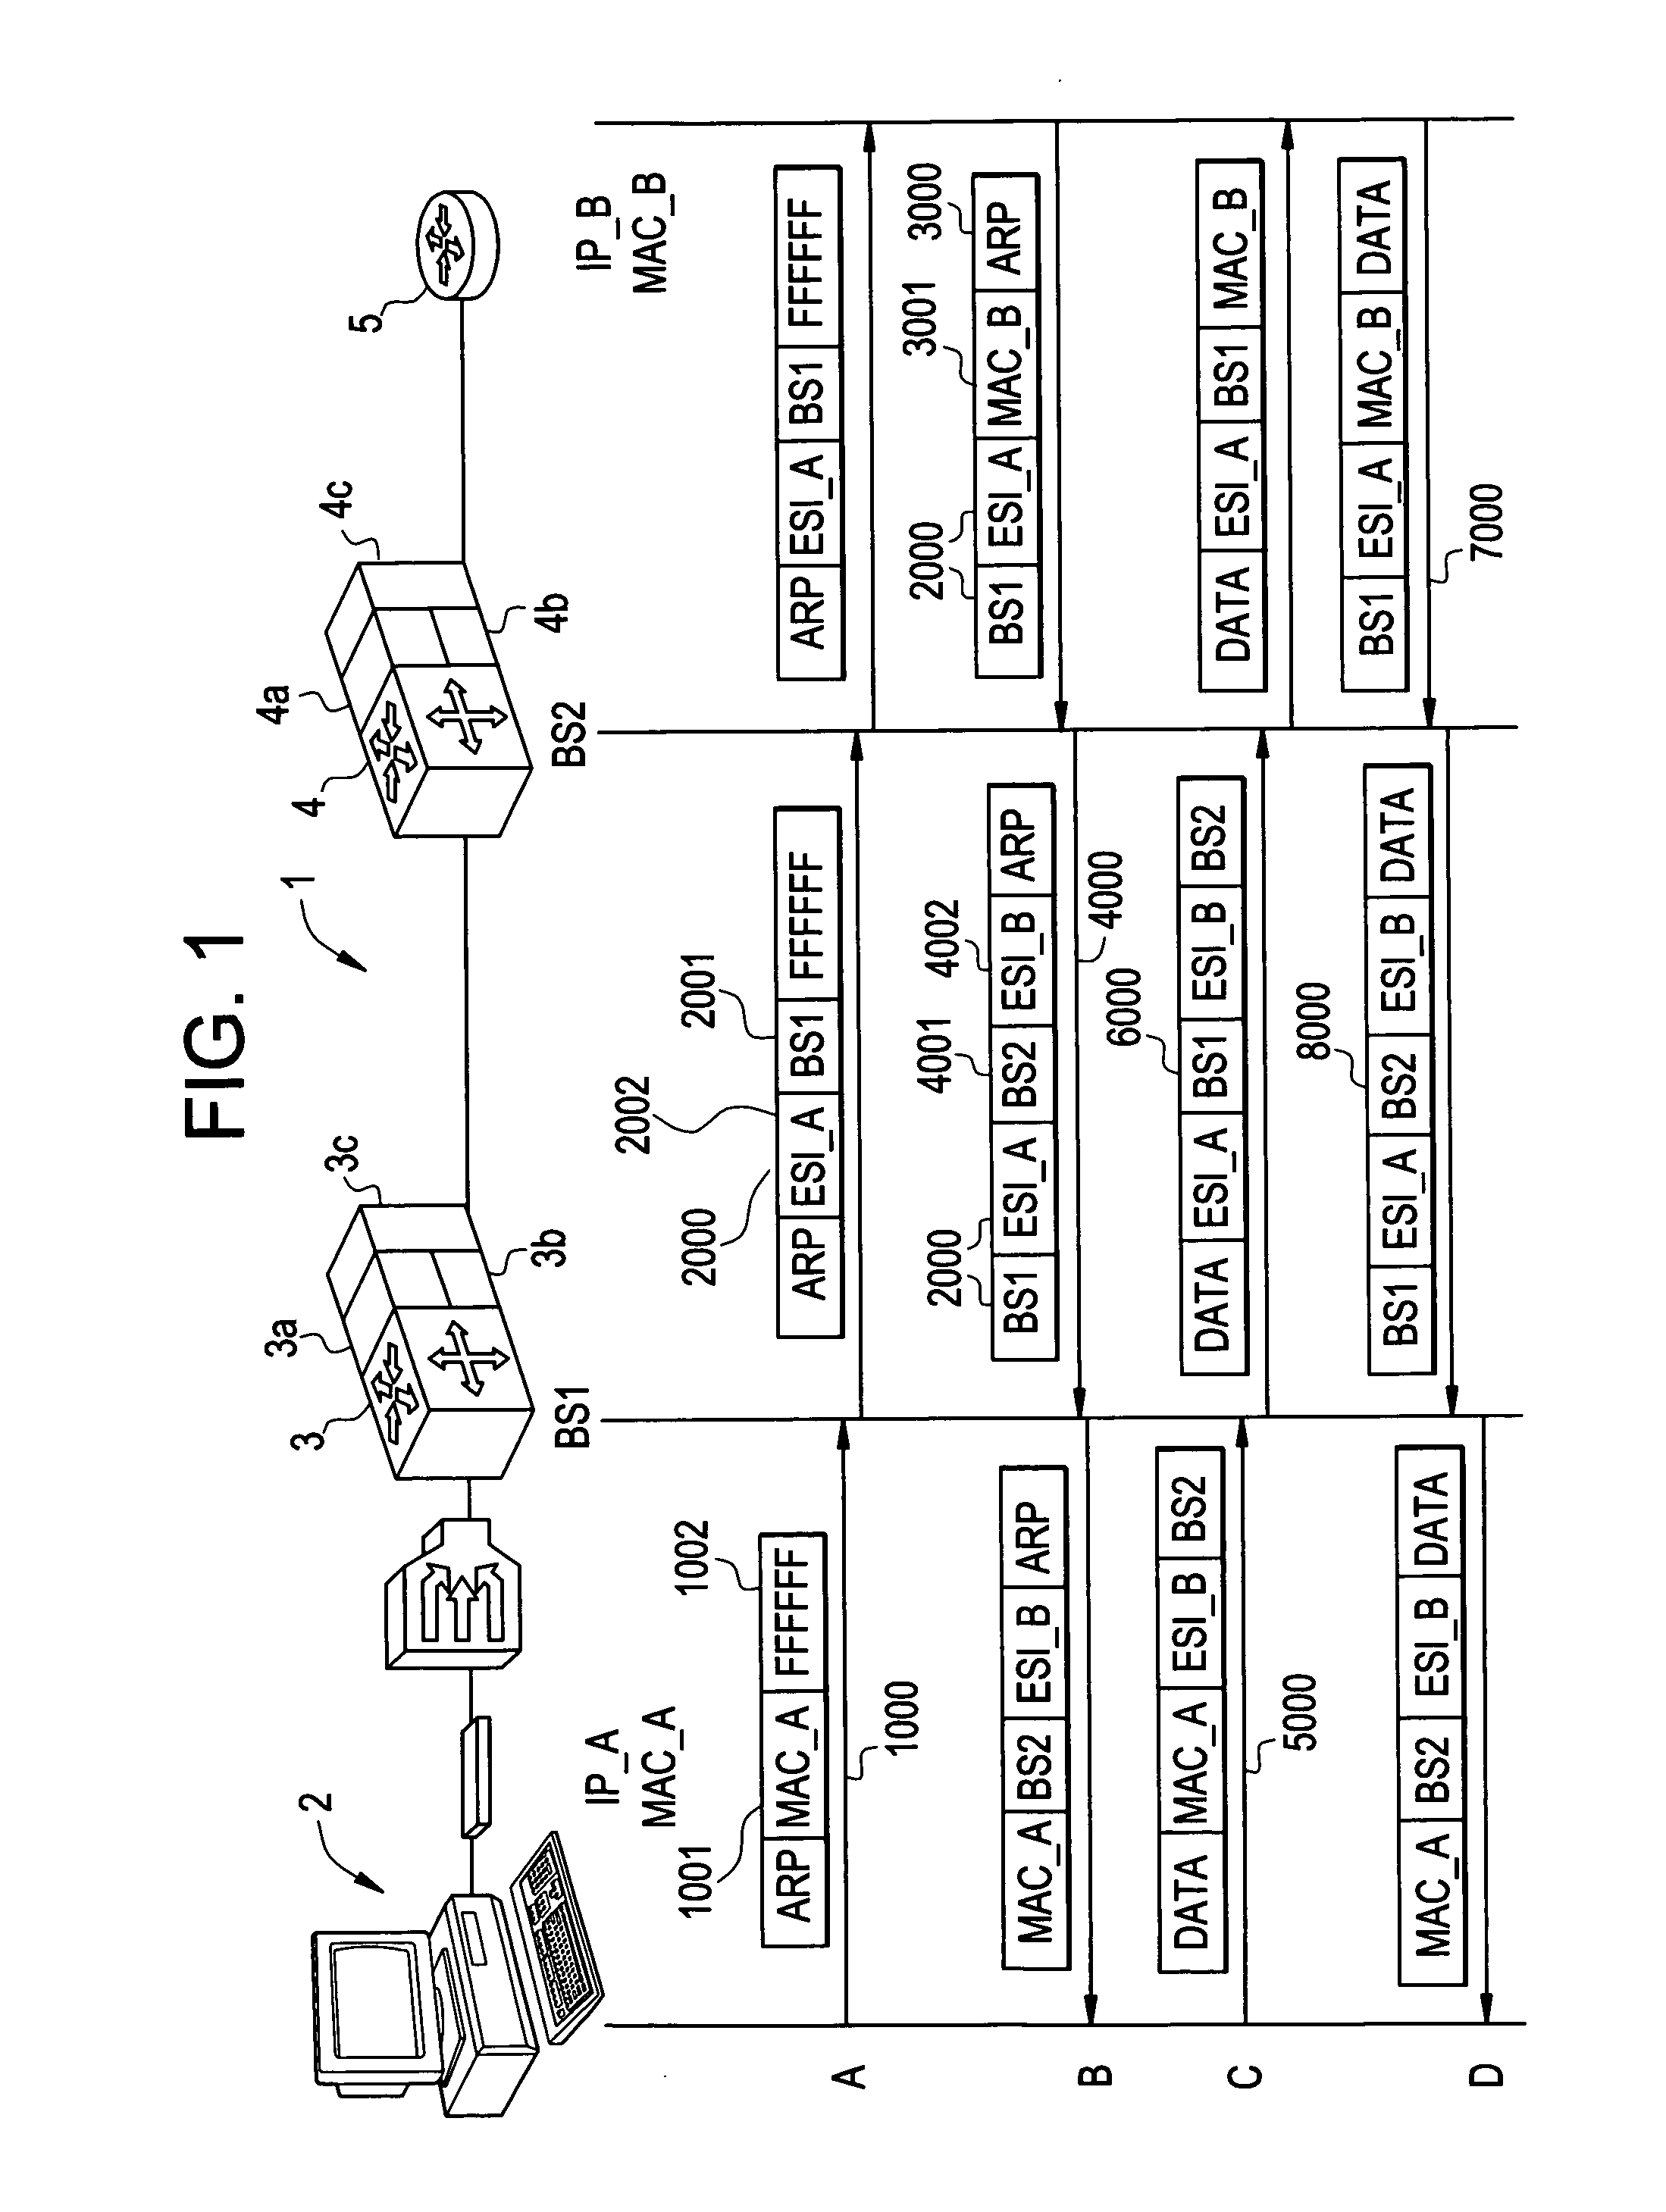 Methods and devices for generating and forwarding translated MAC addresses